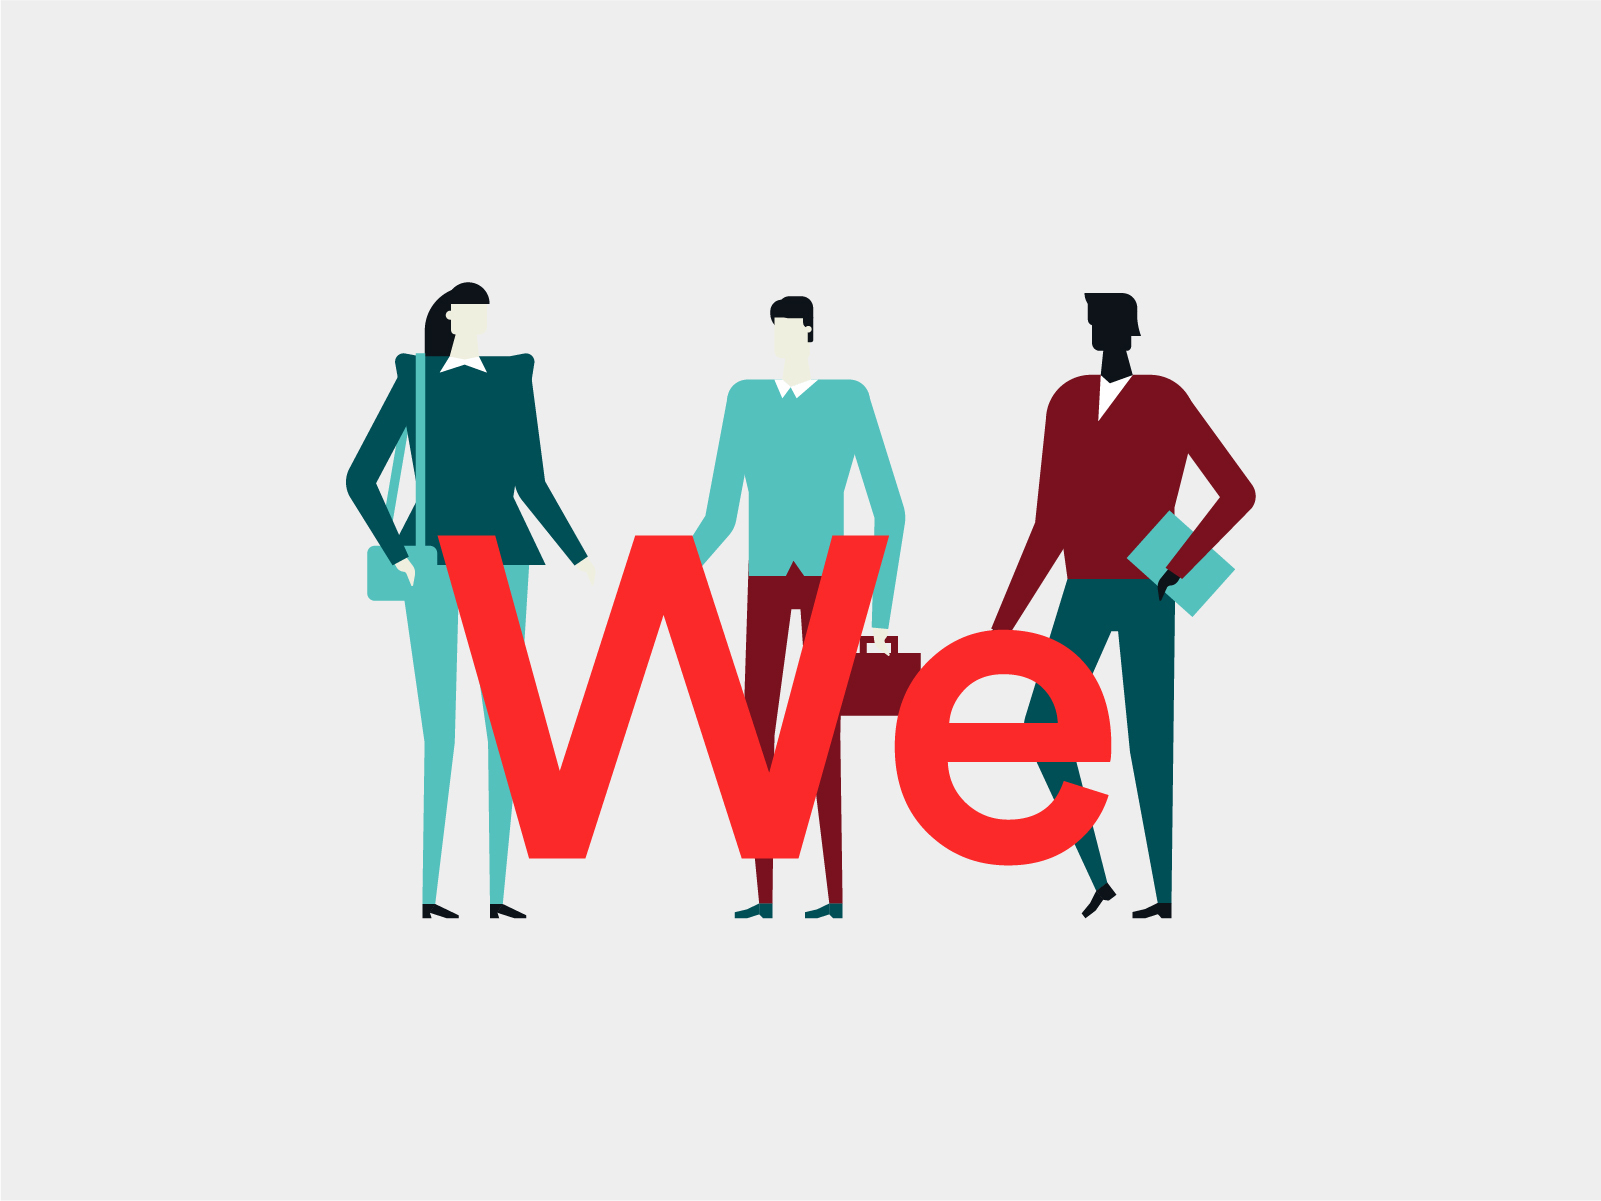 Illustration of three people standing behind the word "We"